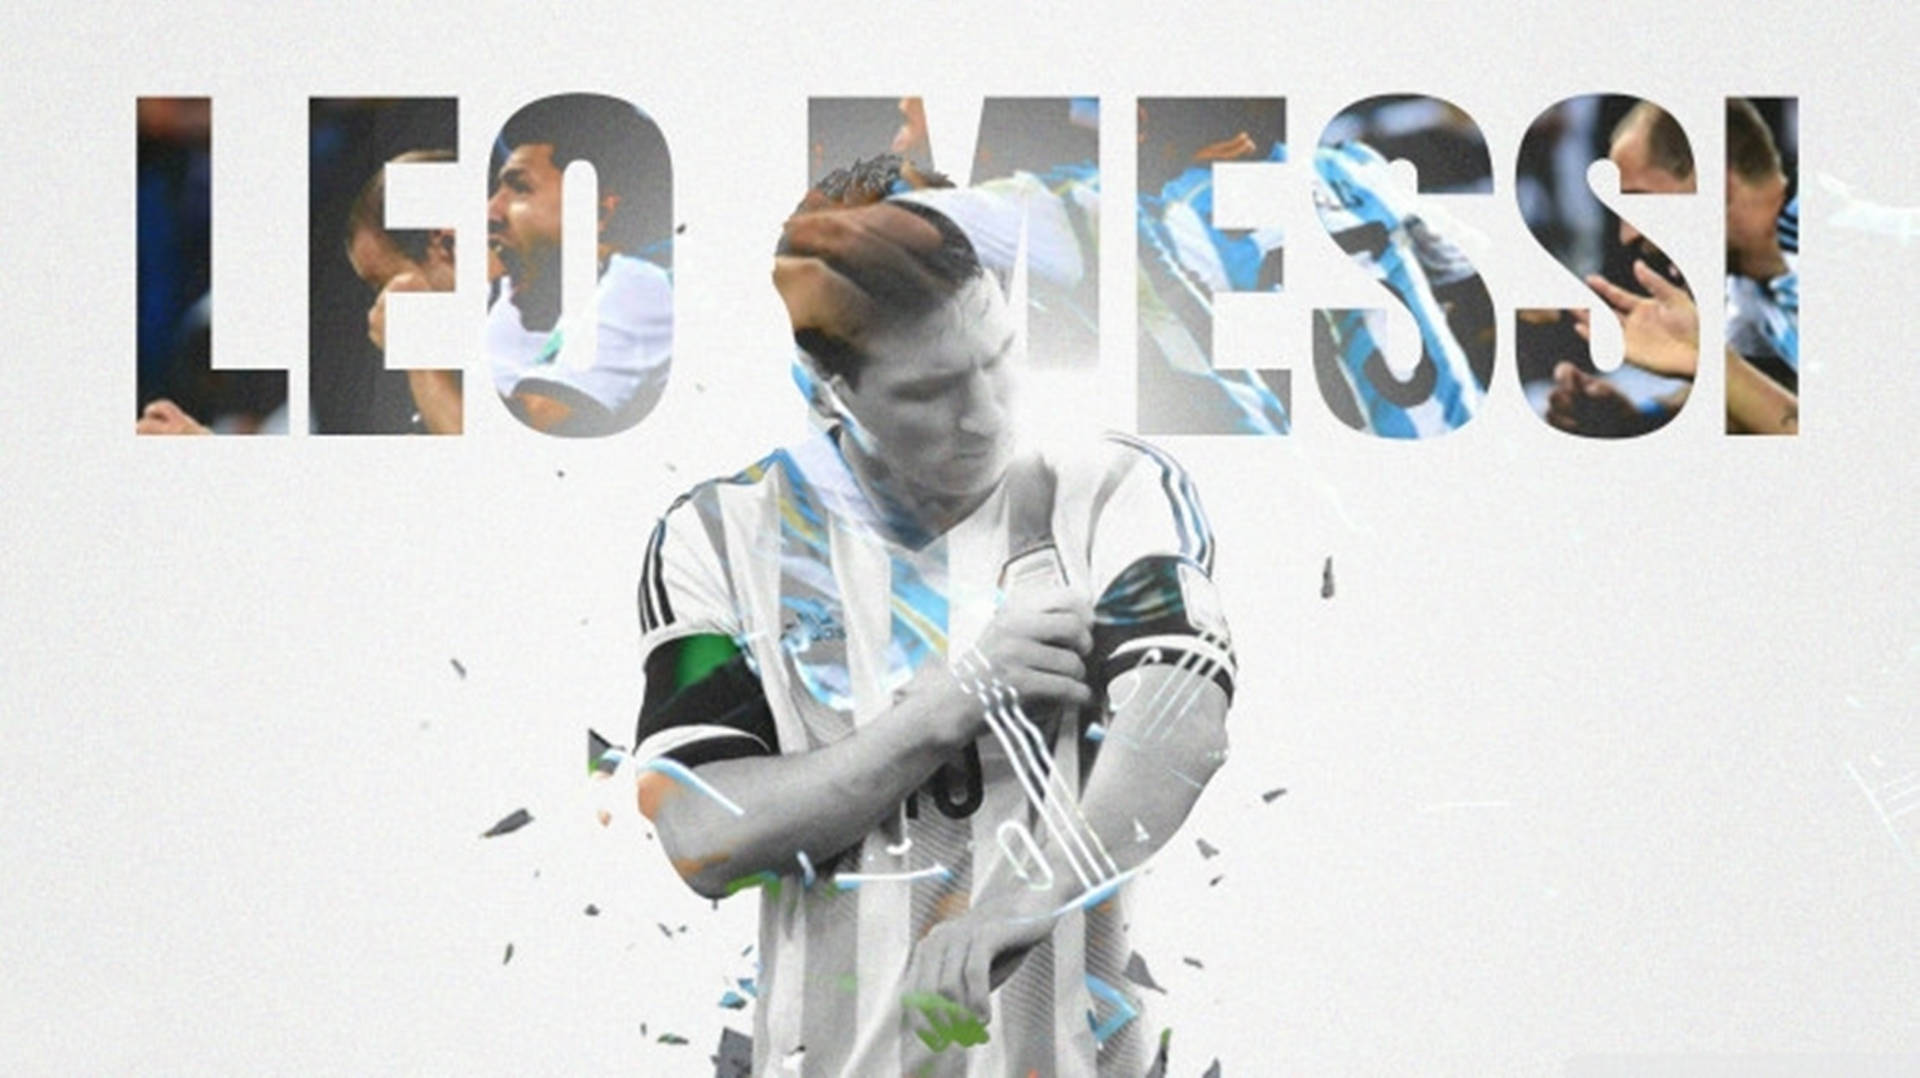 The legend of football, Lionel Messi donning Argentina jersey. Wallpaper